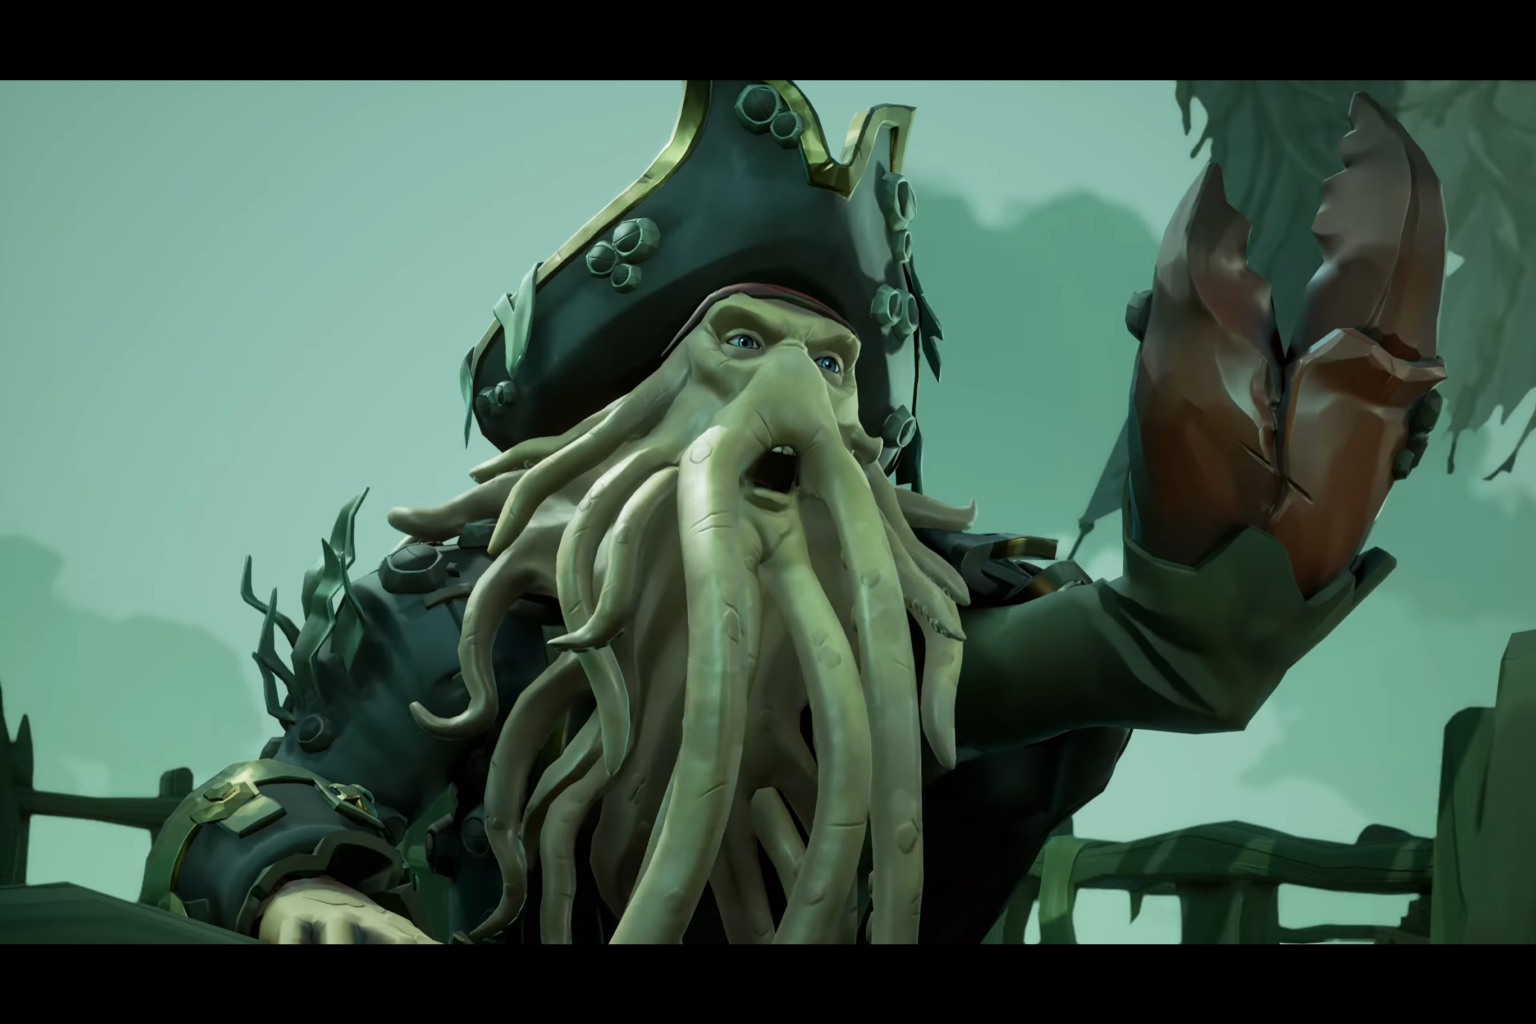 sea of thieves will have more enemies